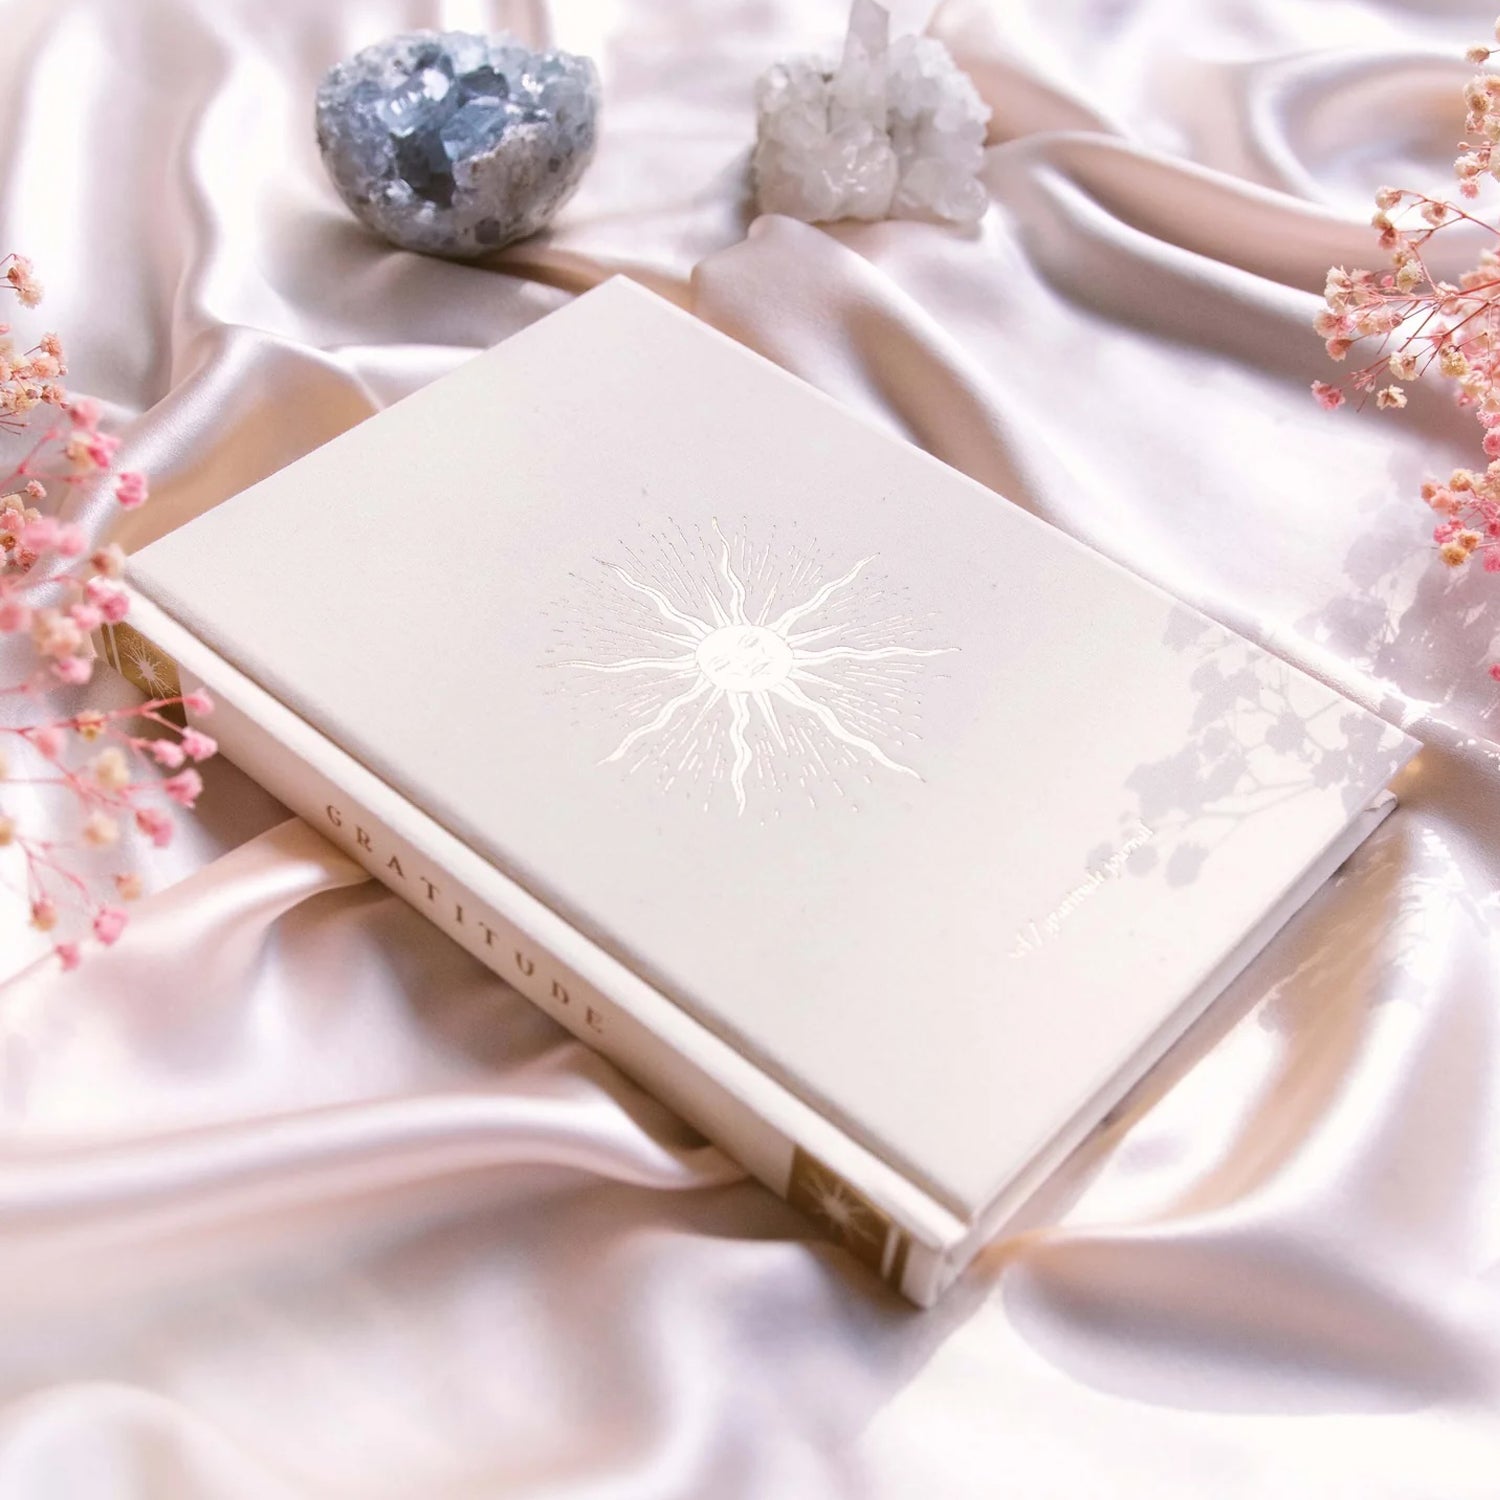 Dreamy Moons Gratitude Journal - Wild and Cruelty Free Rituals and Wellness